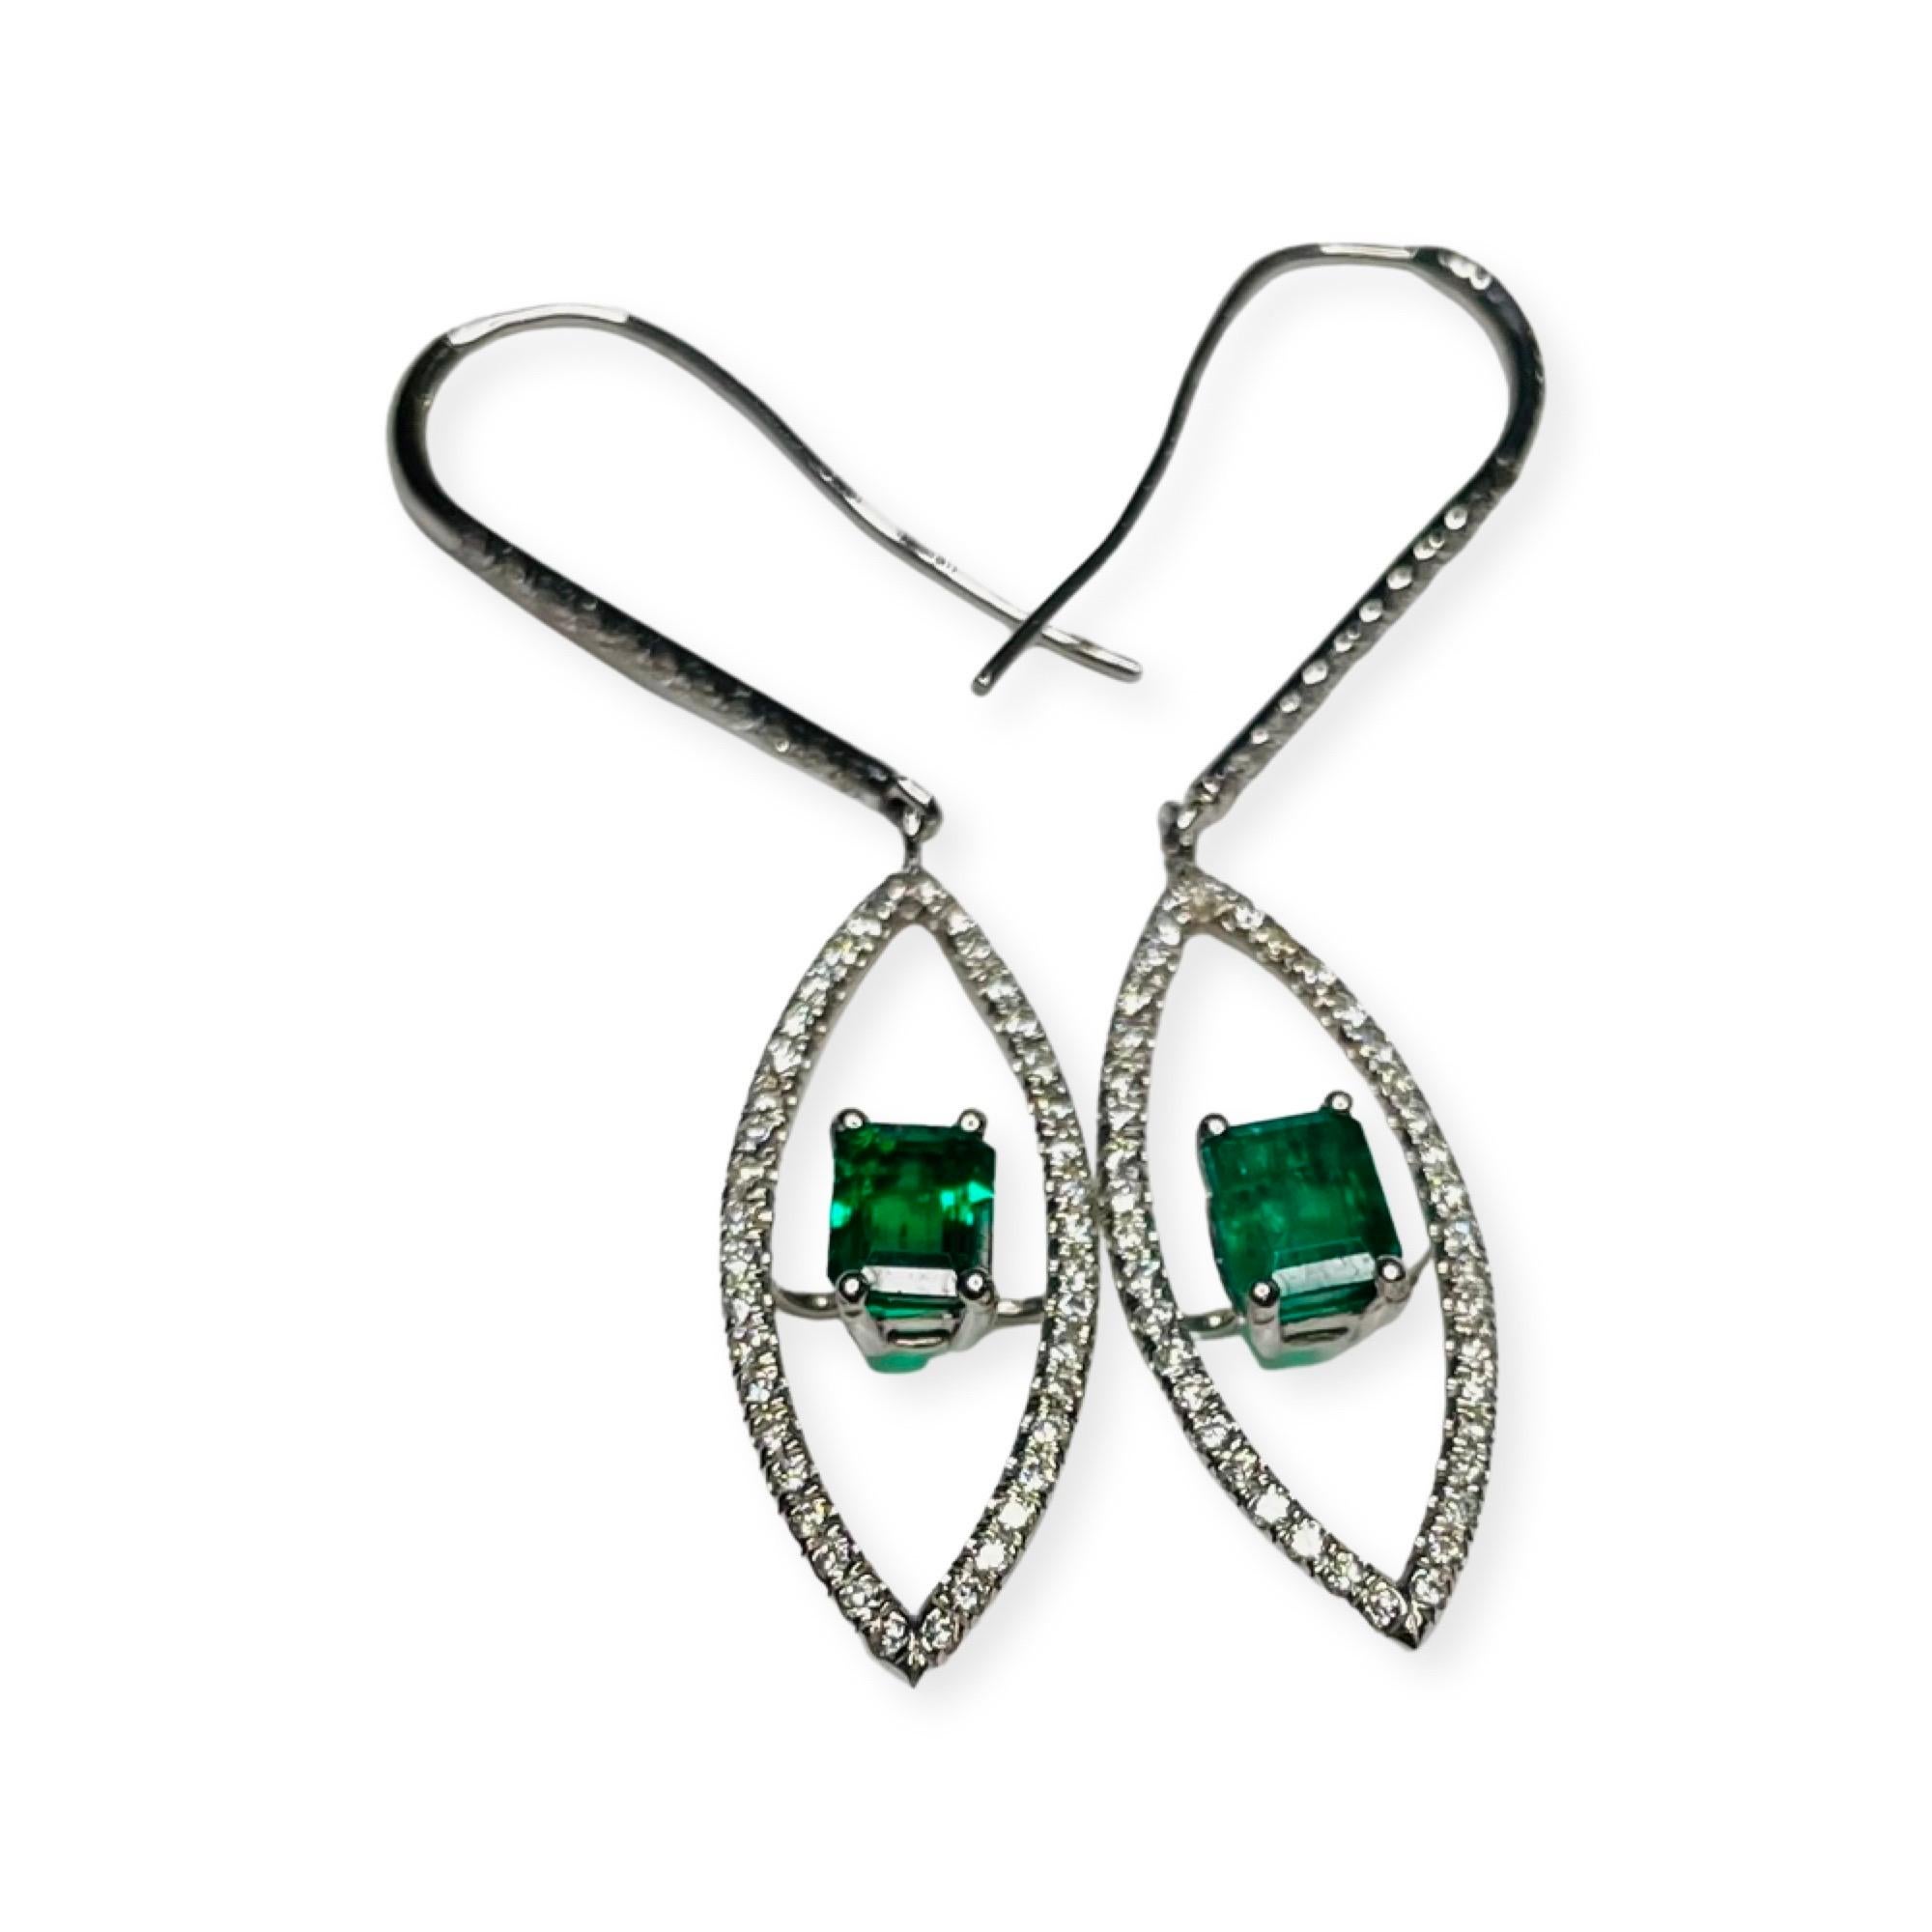 Contemporary Lithos 18K White Gold Diamond & Emerald Earrings For Sale